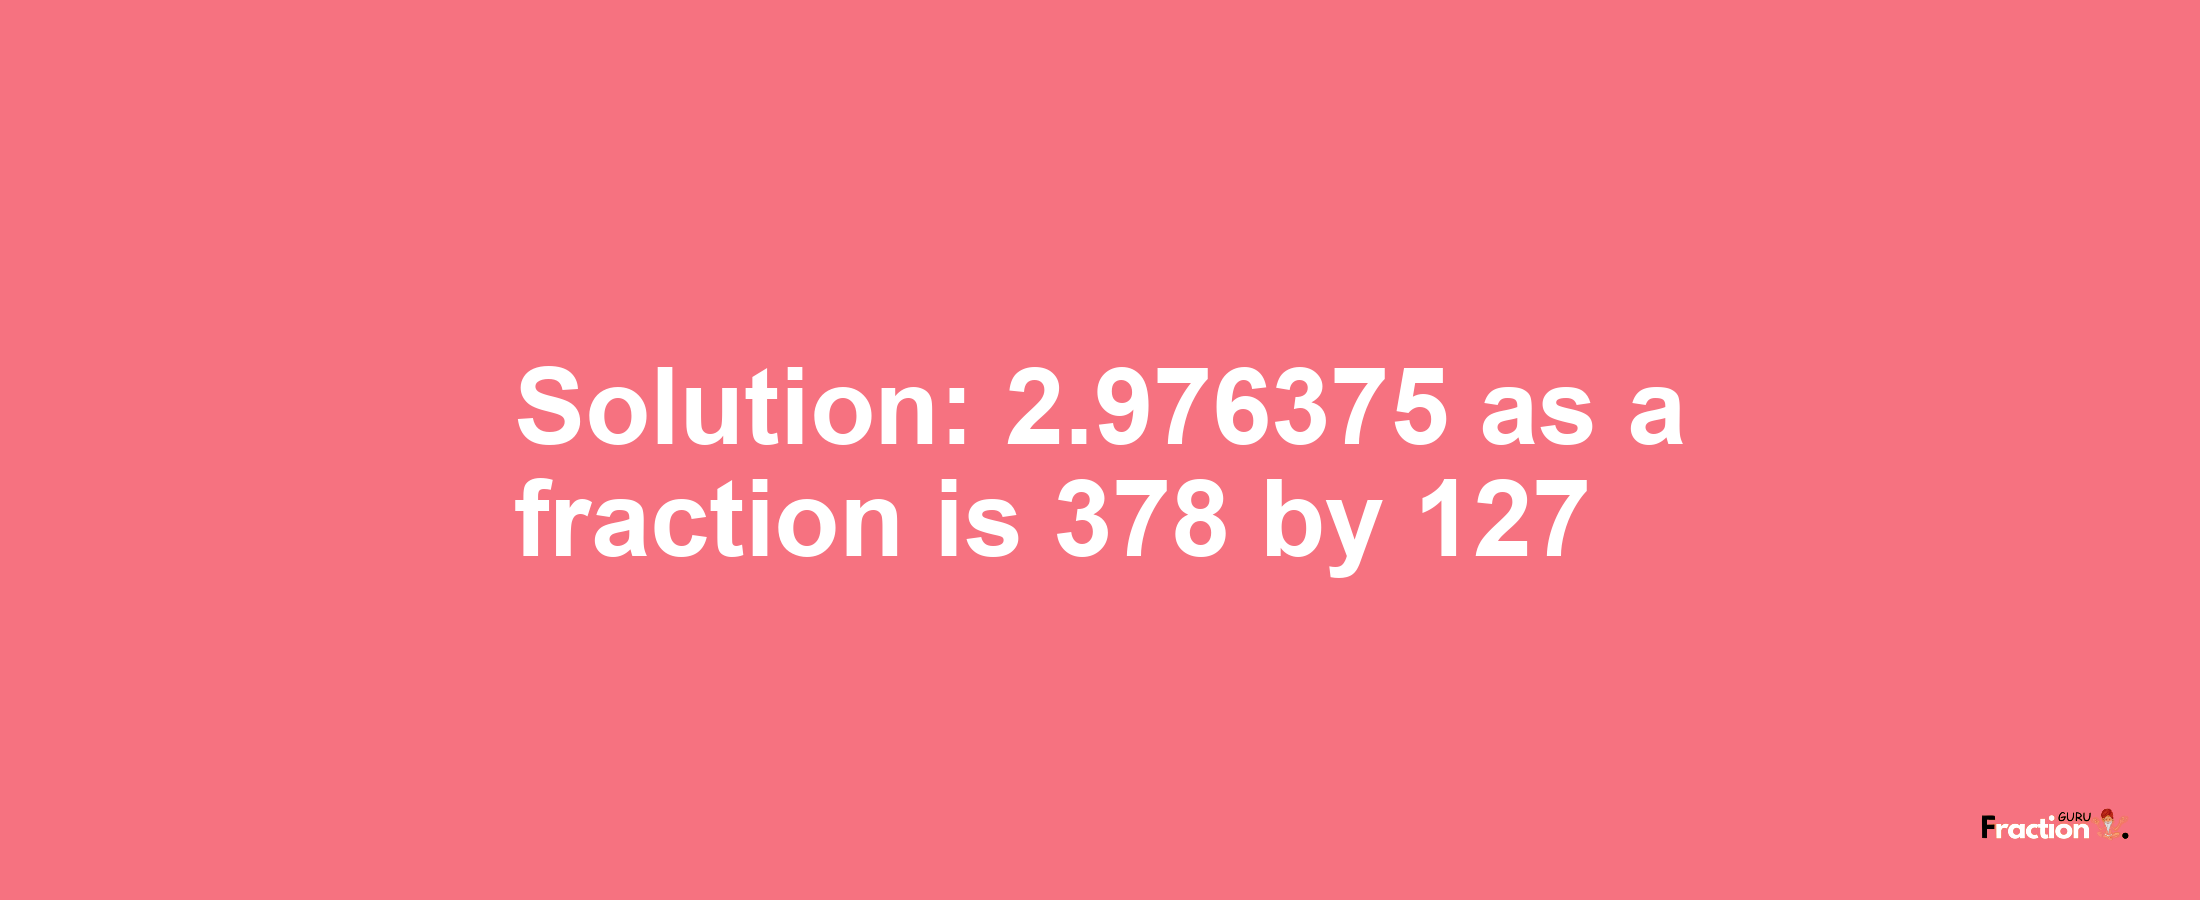 Solution:2.976375 as a fraction is 378/127